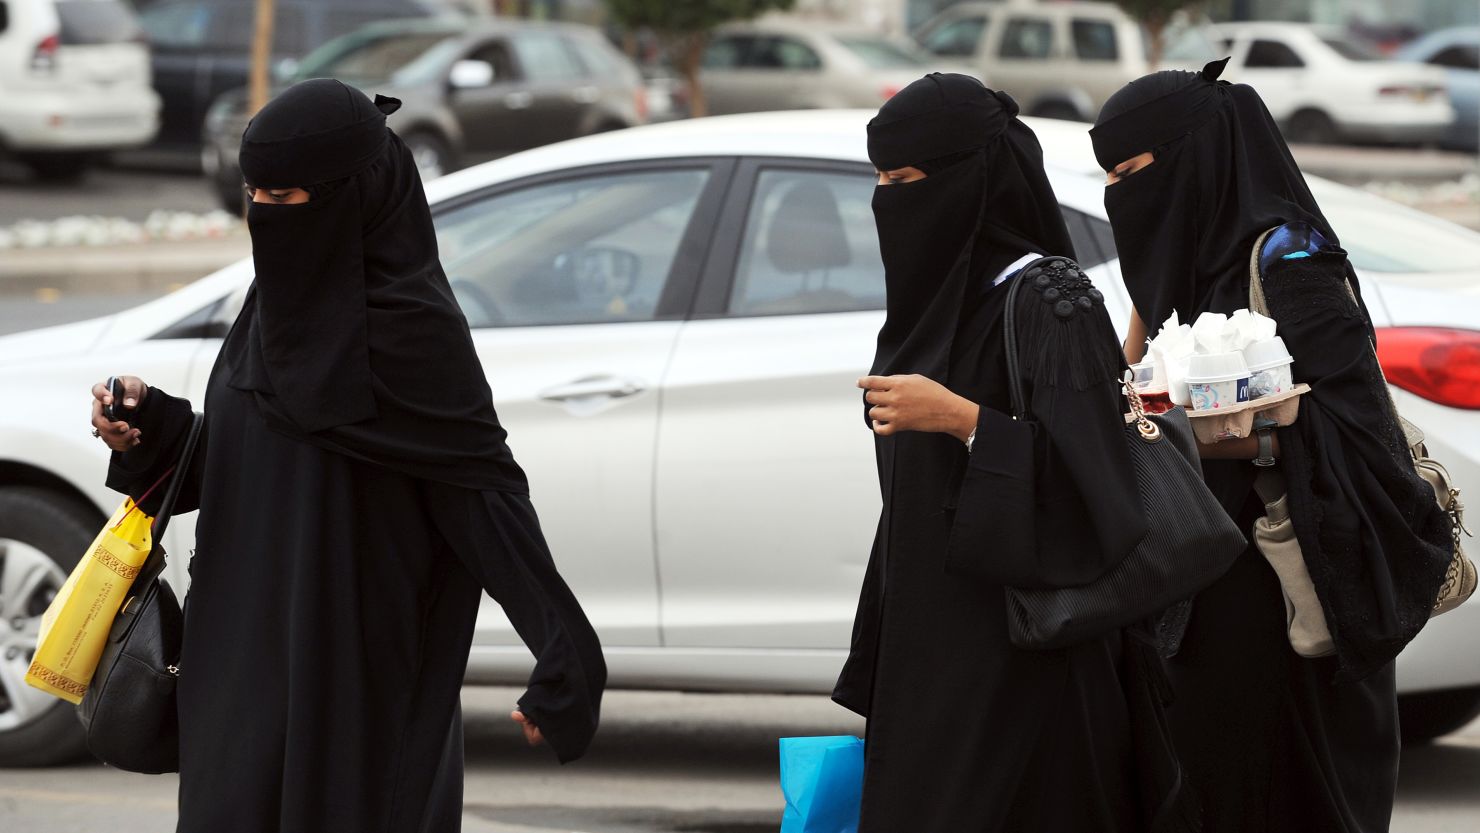 "At the end of the day, ... we're still waiting for our basic rights," a Saudi women's rights activist said.